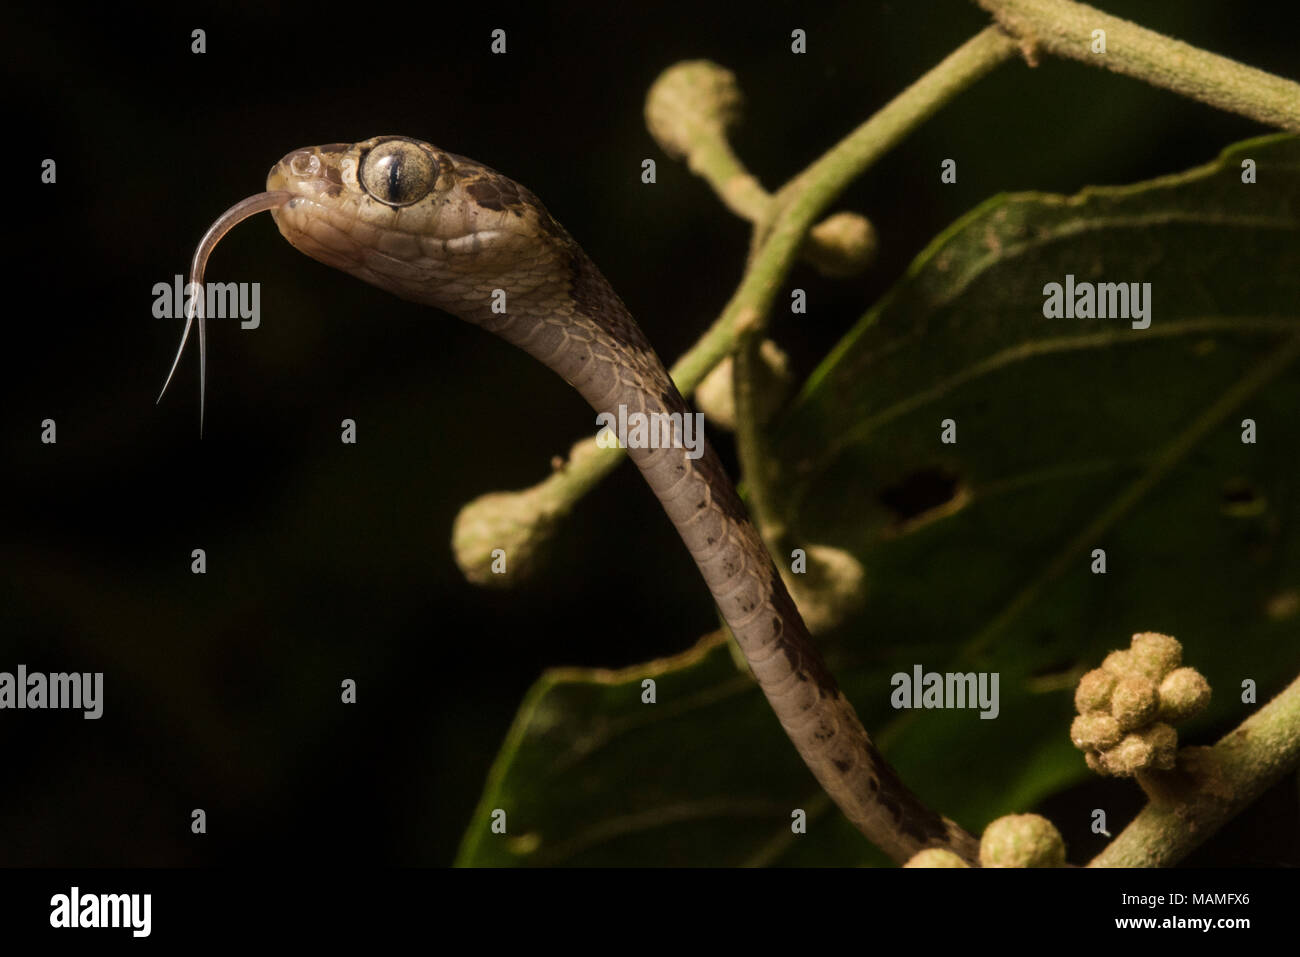 A nocturnal snake of the neotropics, the blunthead tree snake (Imantodes cenchoa).  These snakes move about the trees & bushes looking for food. Stock Photo